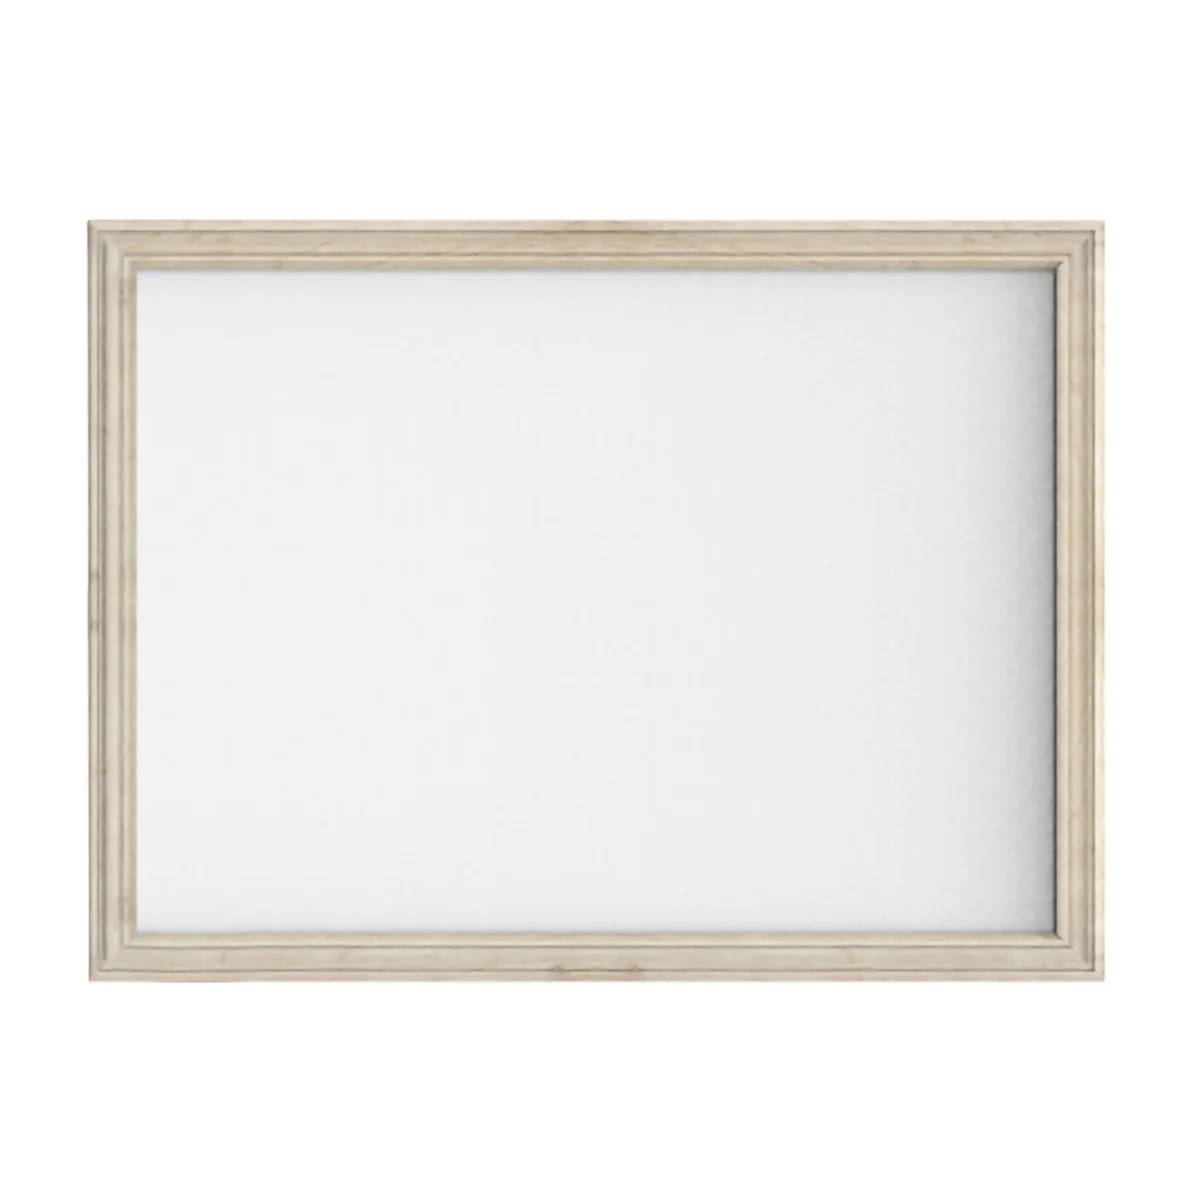 Whiteboard with wooden frame